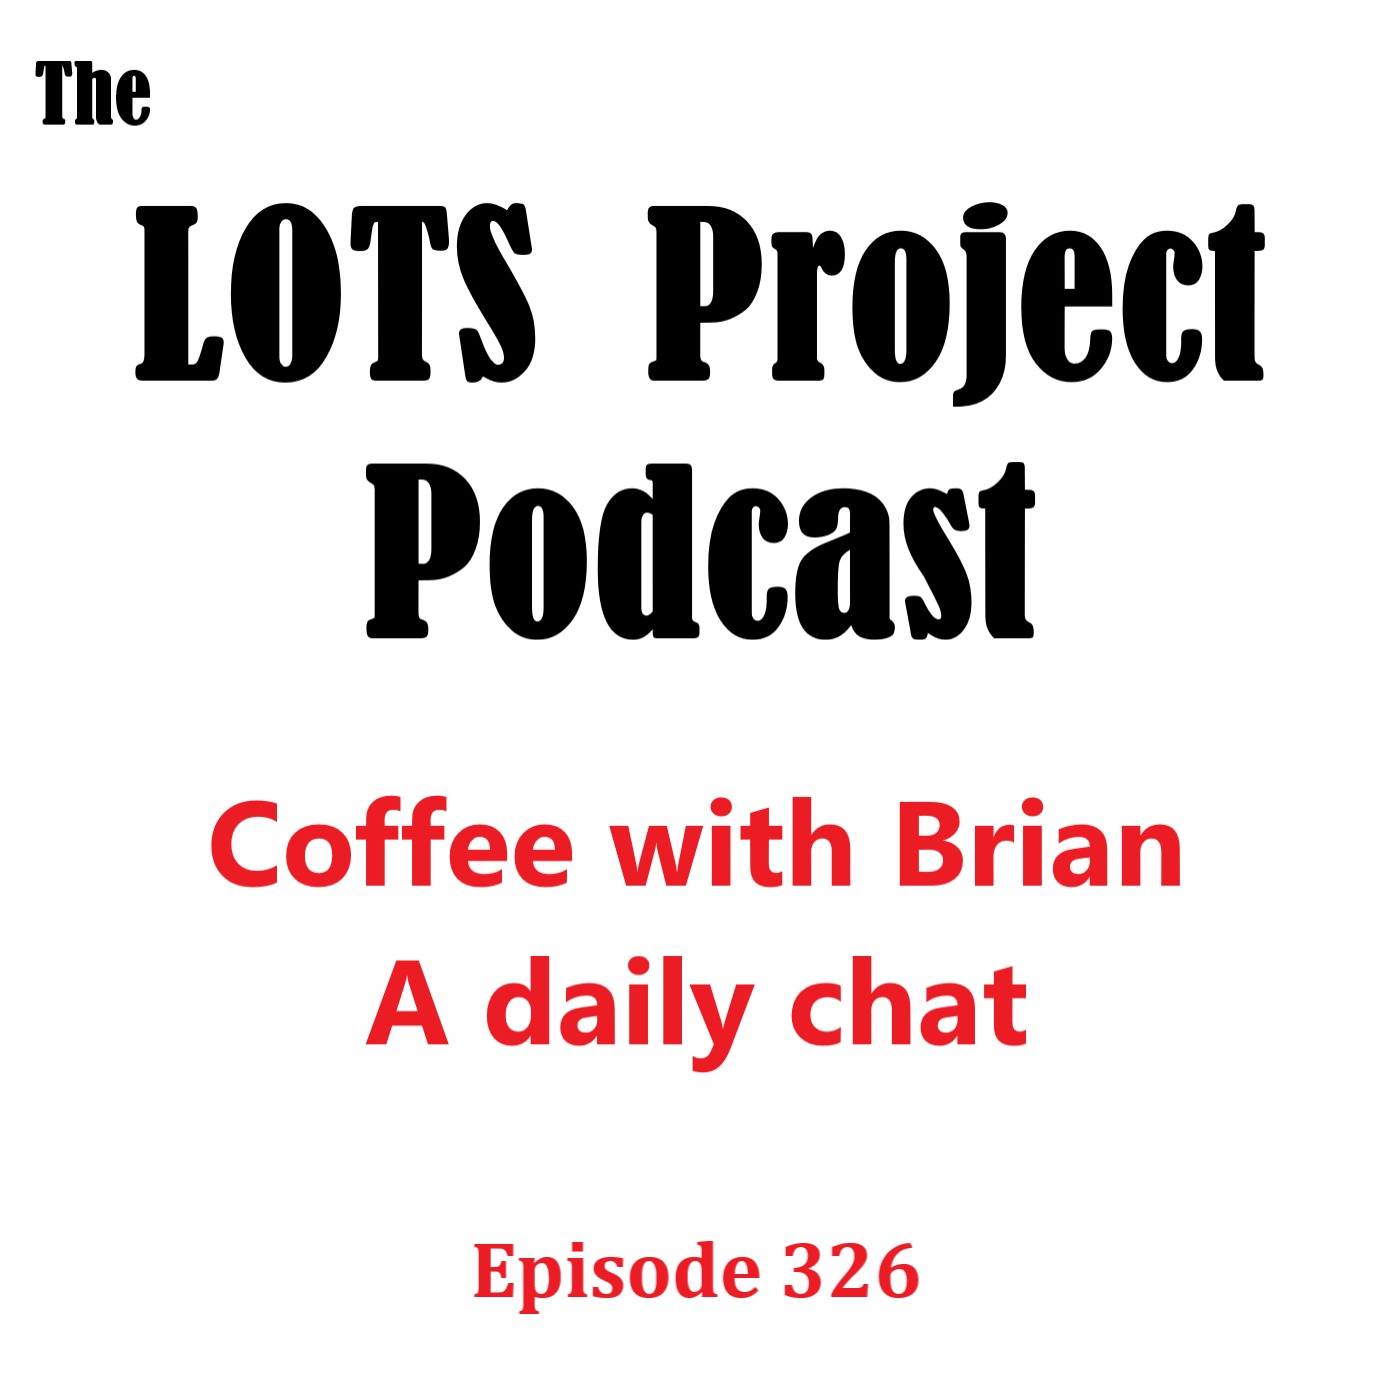 Episode 326 Coffee with Brian, A Daily Morning Chat #podcast #daily #nomad #coffee